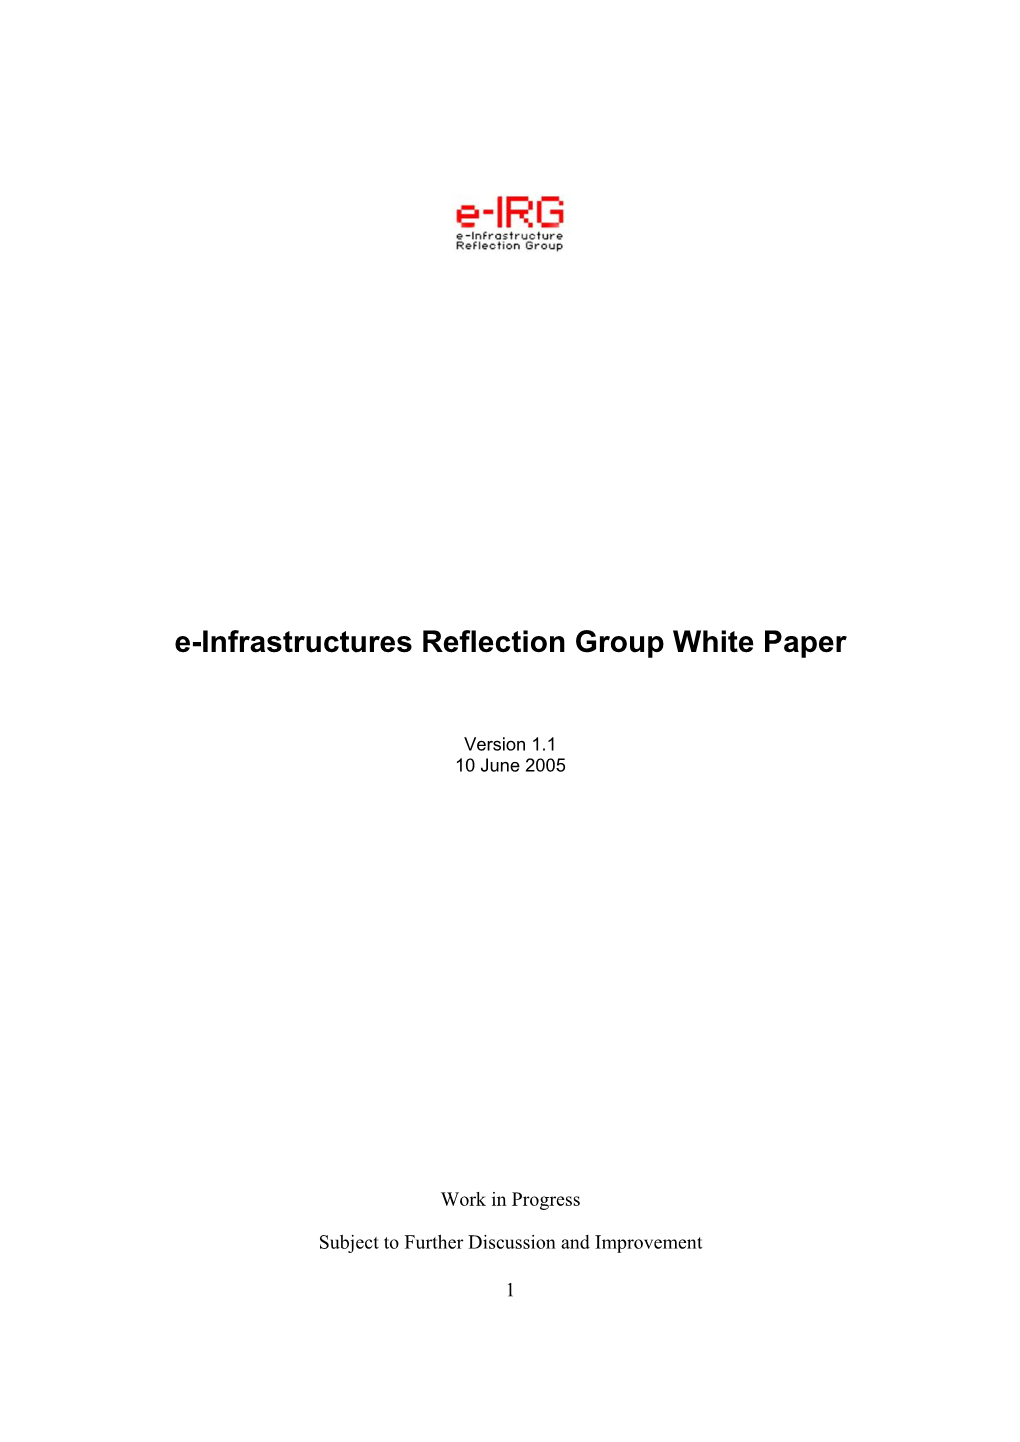 E-Infrastructures Reflection Group White Paper